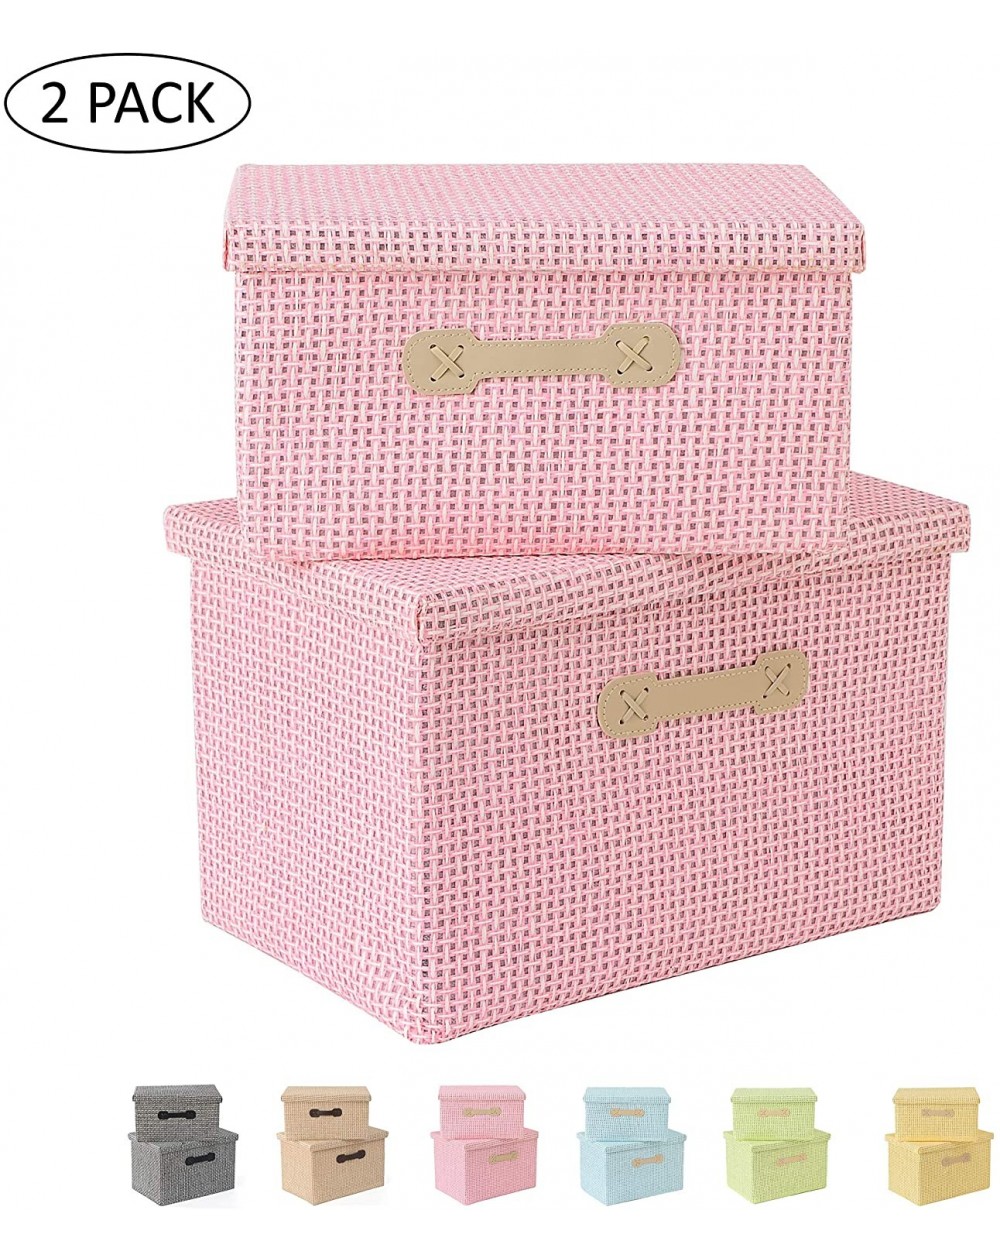 Ceremony Supplies Foldable Paper Woven Storage Bins Cube Lidded Storage Basket with Handle Organizer Decorative Box Container...